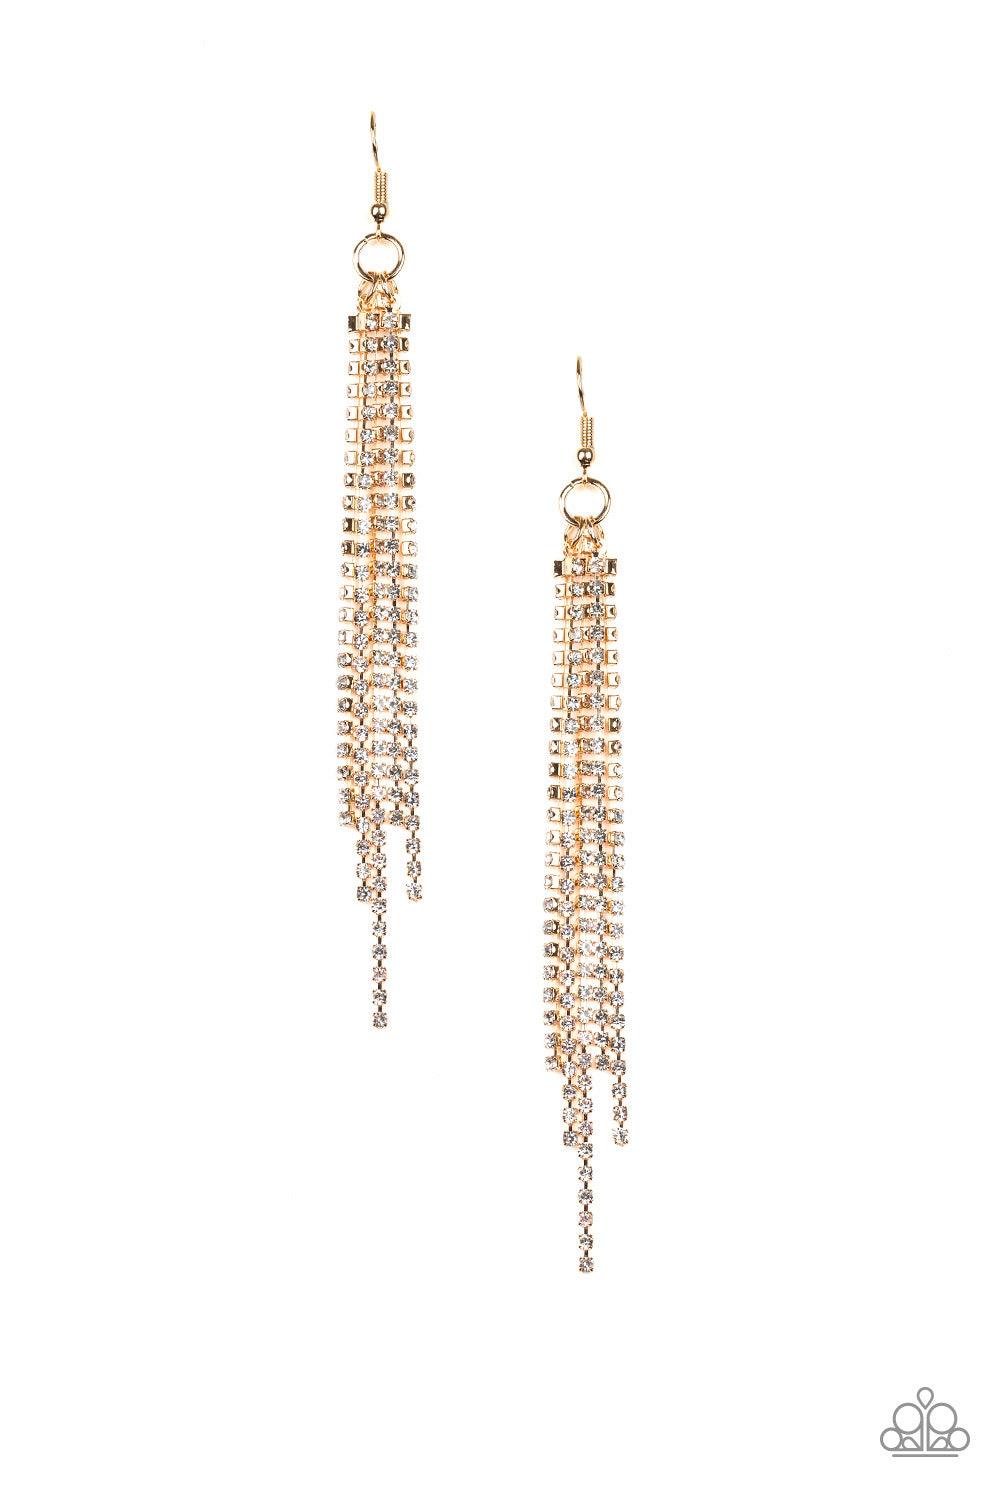 Paparazzi Accessories Center Stage Status - Gold Featuring sleek square fittings, strands of glittery white rhinestones freefall from the ear, creating a glamorous fringe. Earring attaches to a standard fishhook fitting. Jewelry